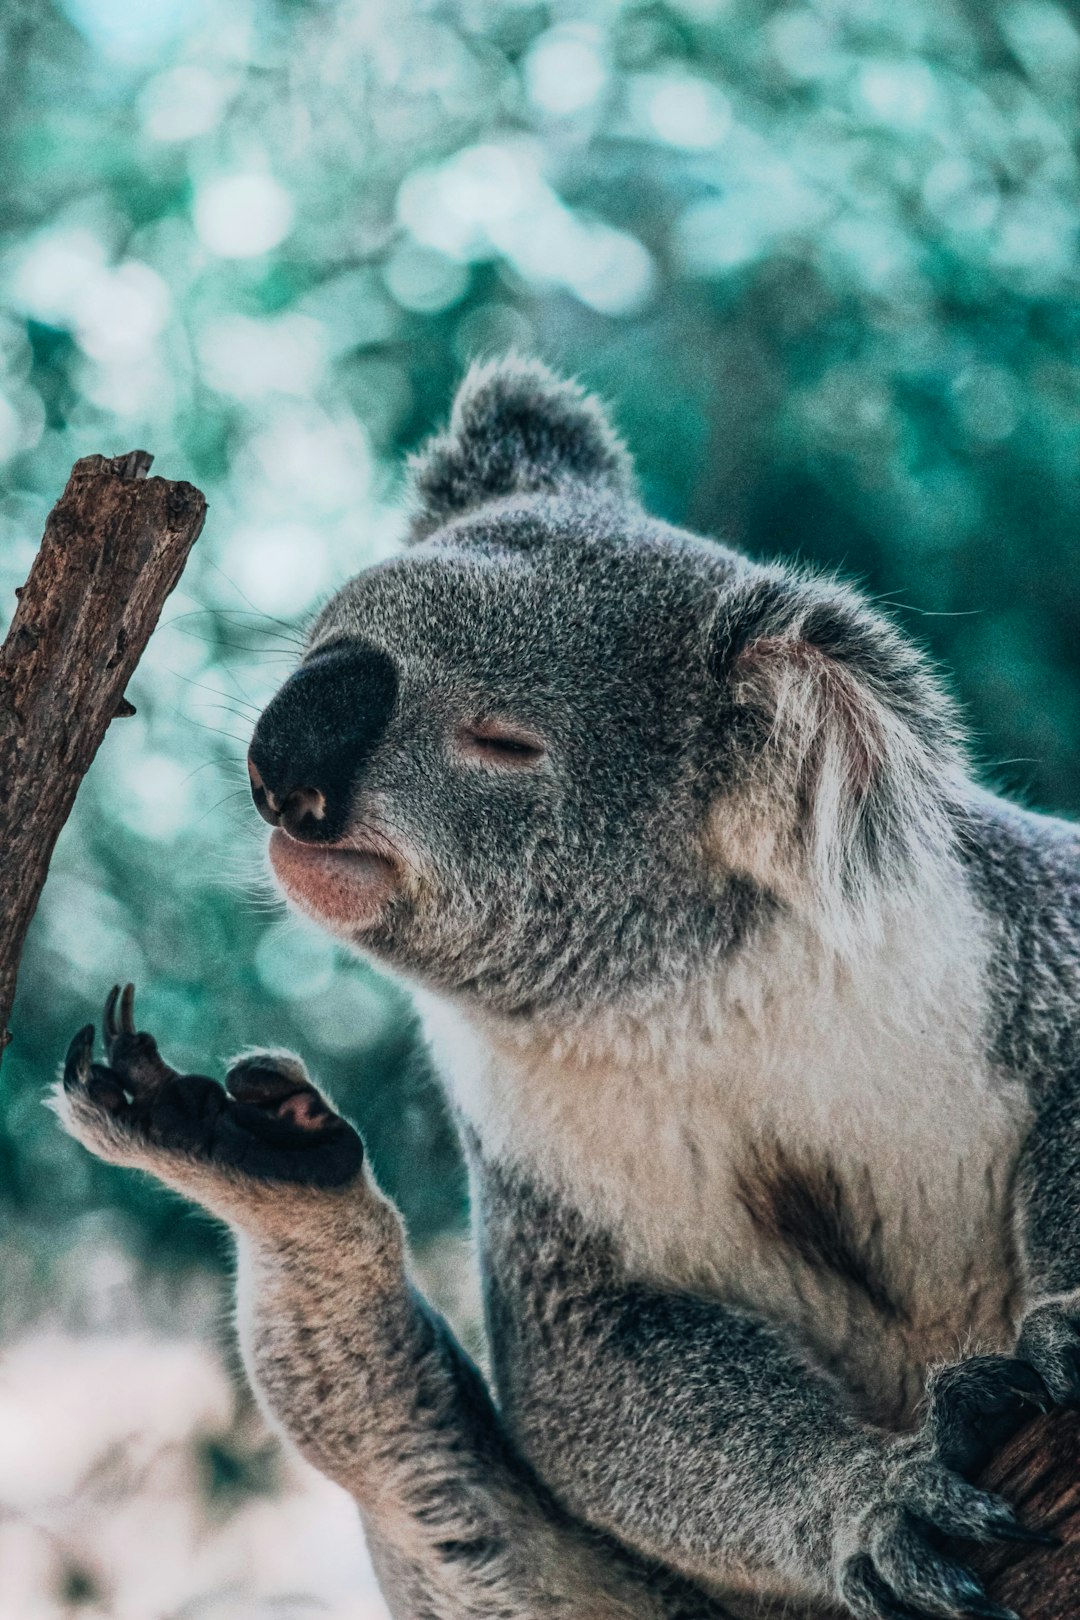 A koala is sitting on a tree with a happy expression, its eyes closed in a happy smile. Its eyes open and close, with a closeup of its hand and palm facing up against a natural environment background in soft tones, captured with a telephoto lens under warm light illumination and a slow shutter speed while in a leisurely posture. –ar 85:128